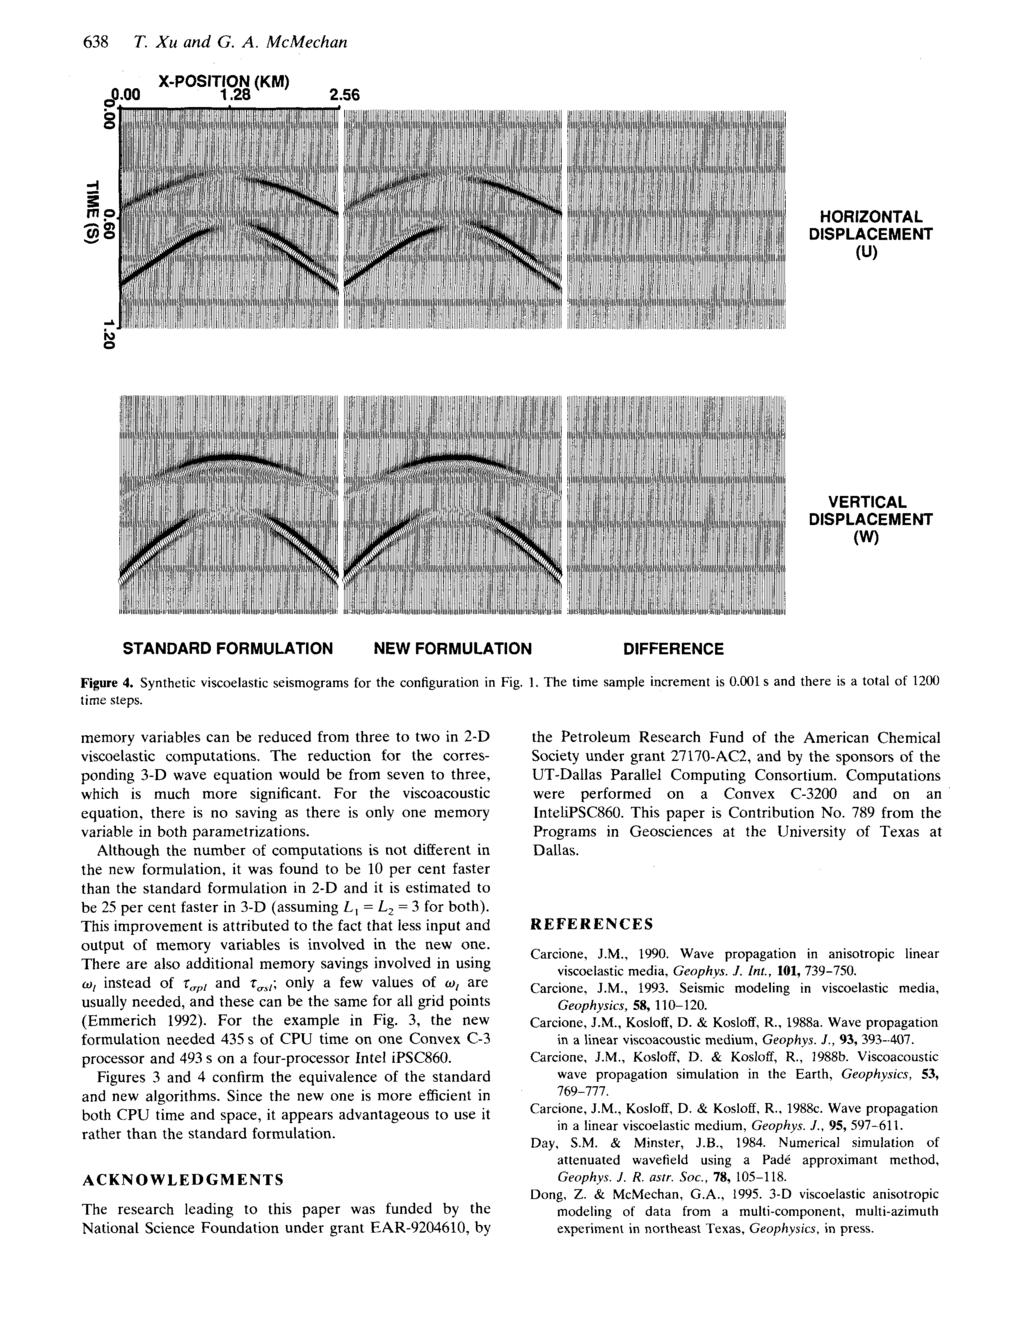 638 T. Xu G. A. McMechan X-POSITION (KM) g.00 1.28 2.56 h) 0 STANDARD FORMULATION NEW FORMULATION DIFFERENCE Figure 4. Synthetic viscoelastic seismograms for the configuration in Fig. 1. The time sample increment is 0.